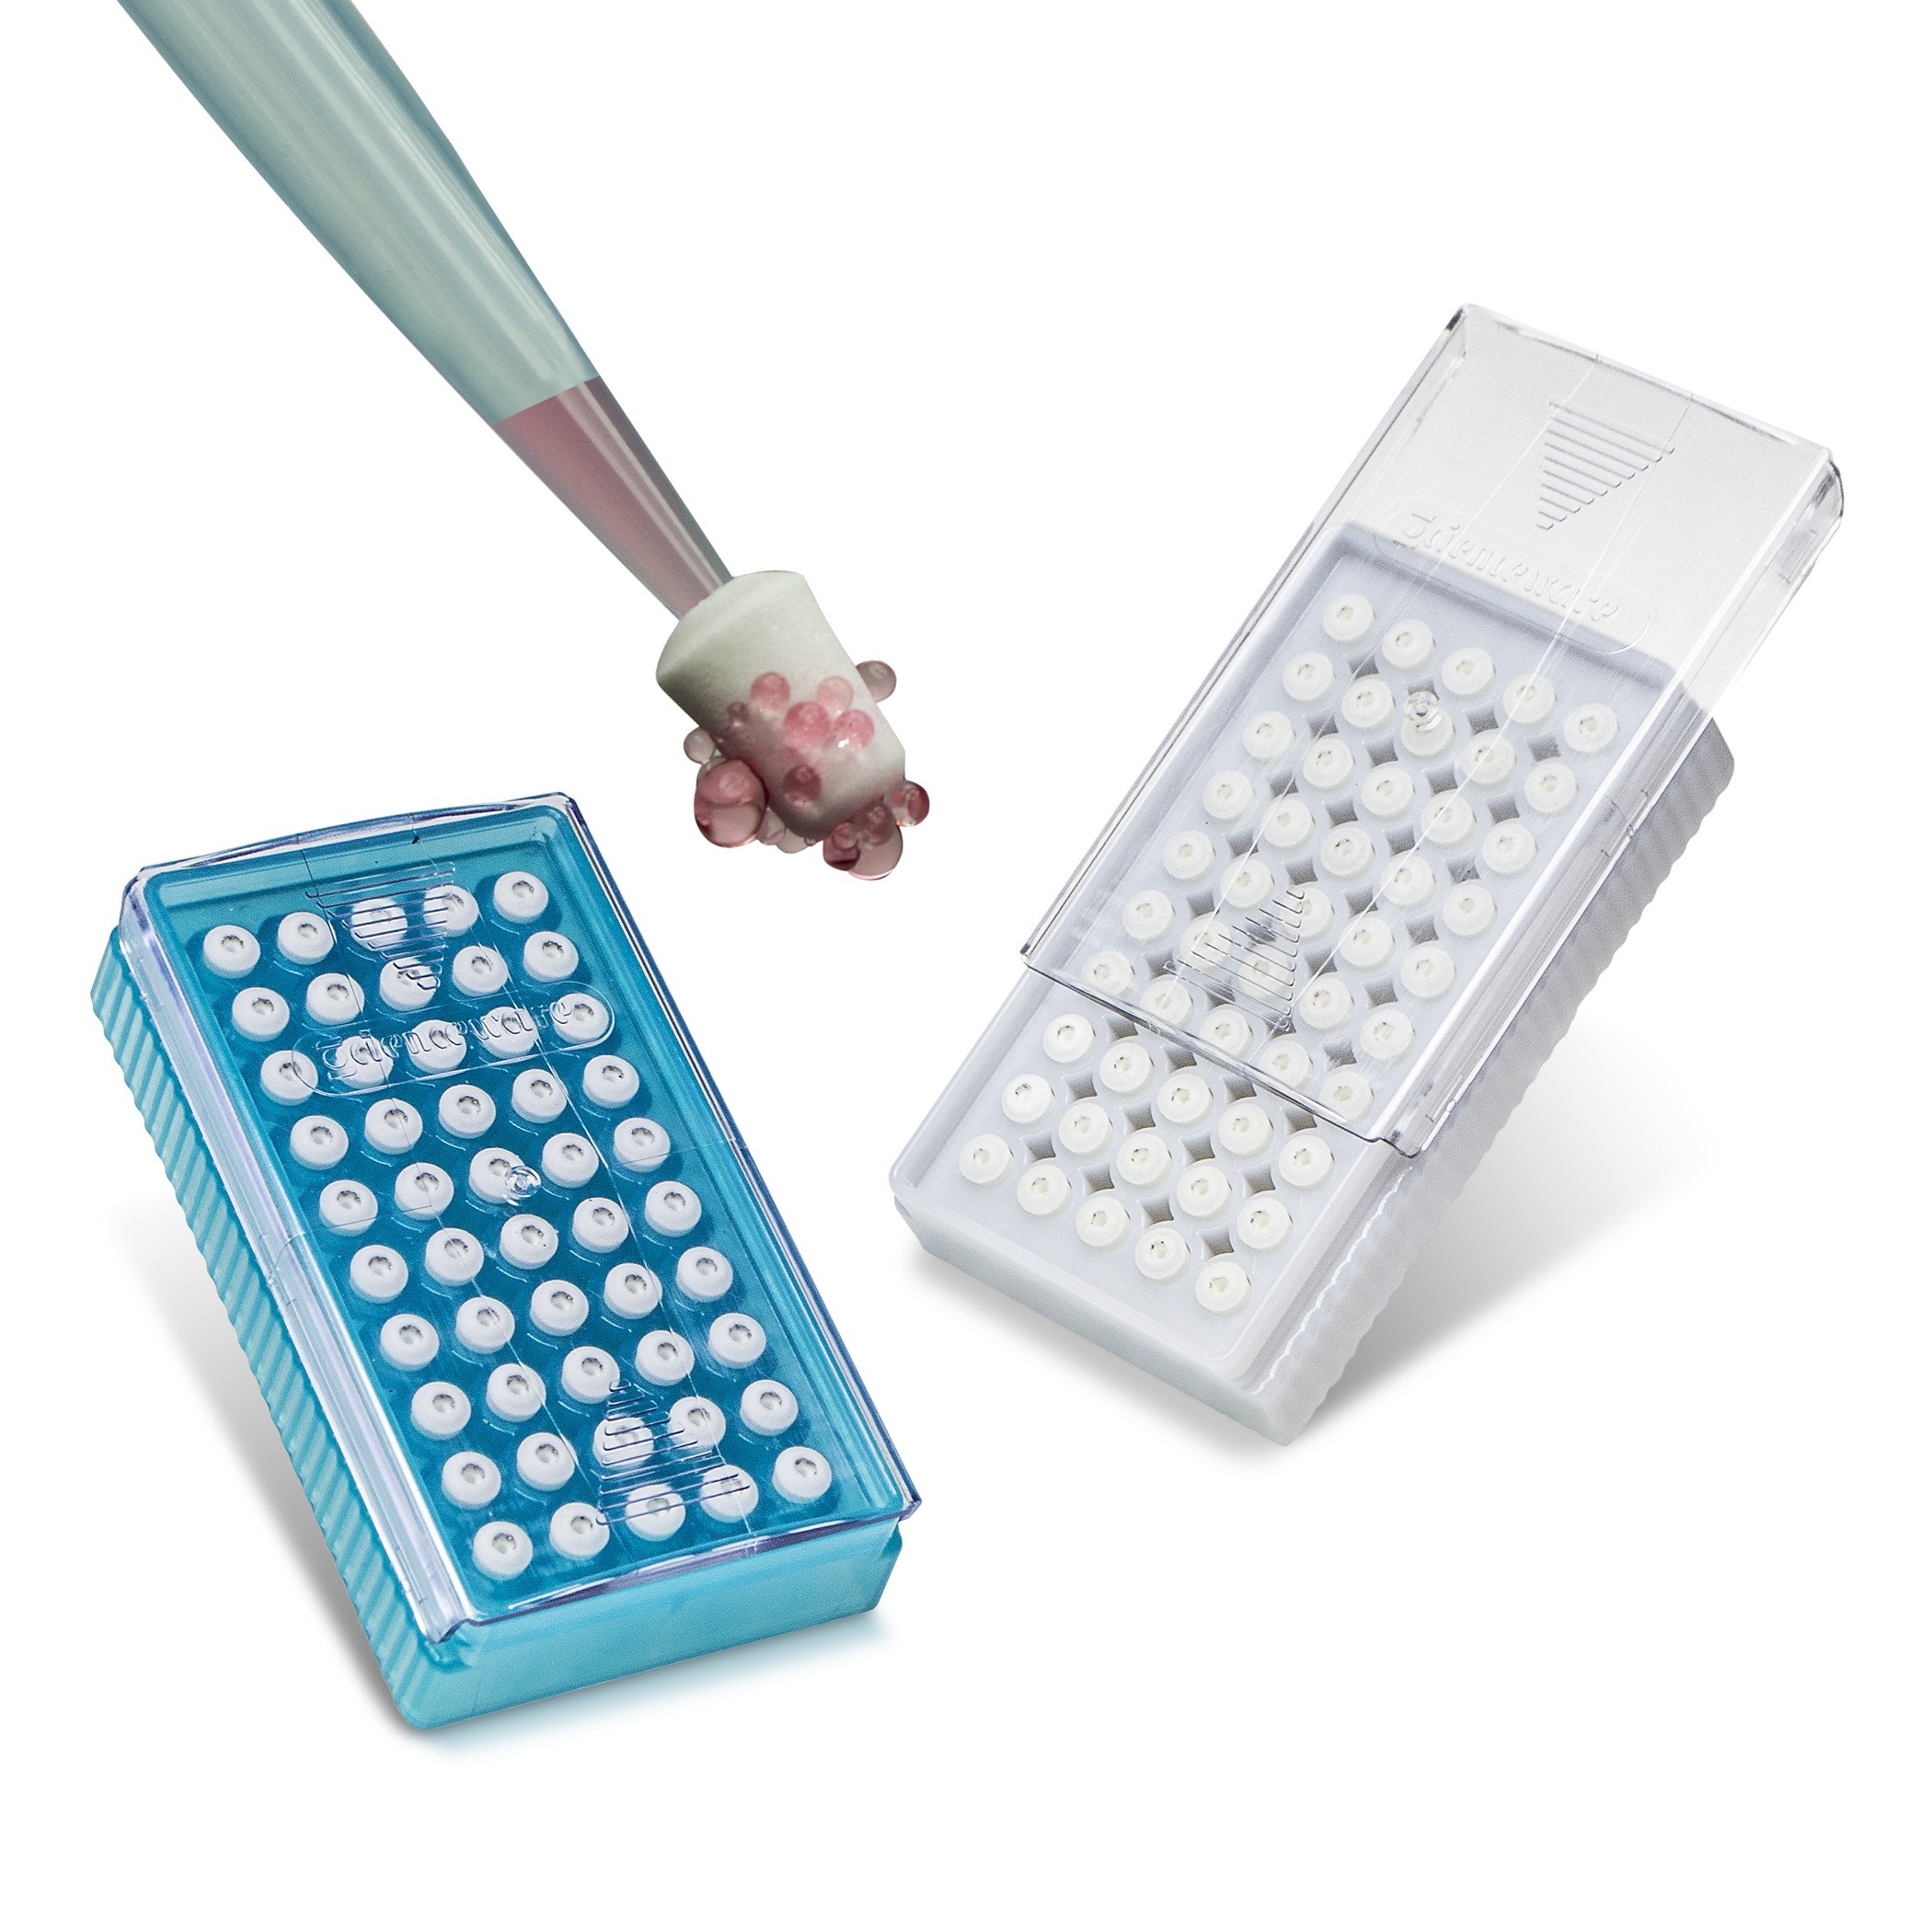 Preserve Small Volume Samples and Avoid FLOW and FACS Clogs with Flowmi™ Cell Strainers from SP Bel-Art™!
